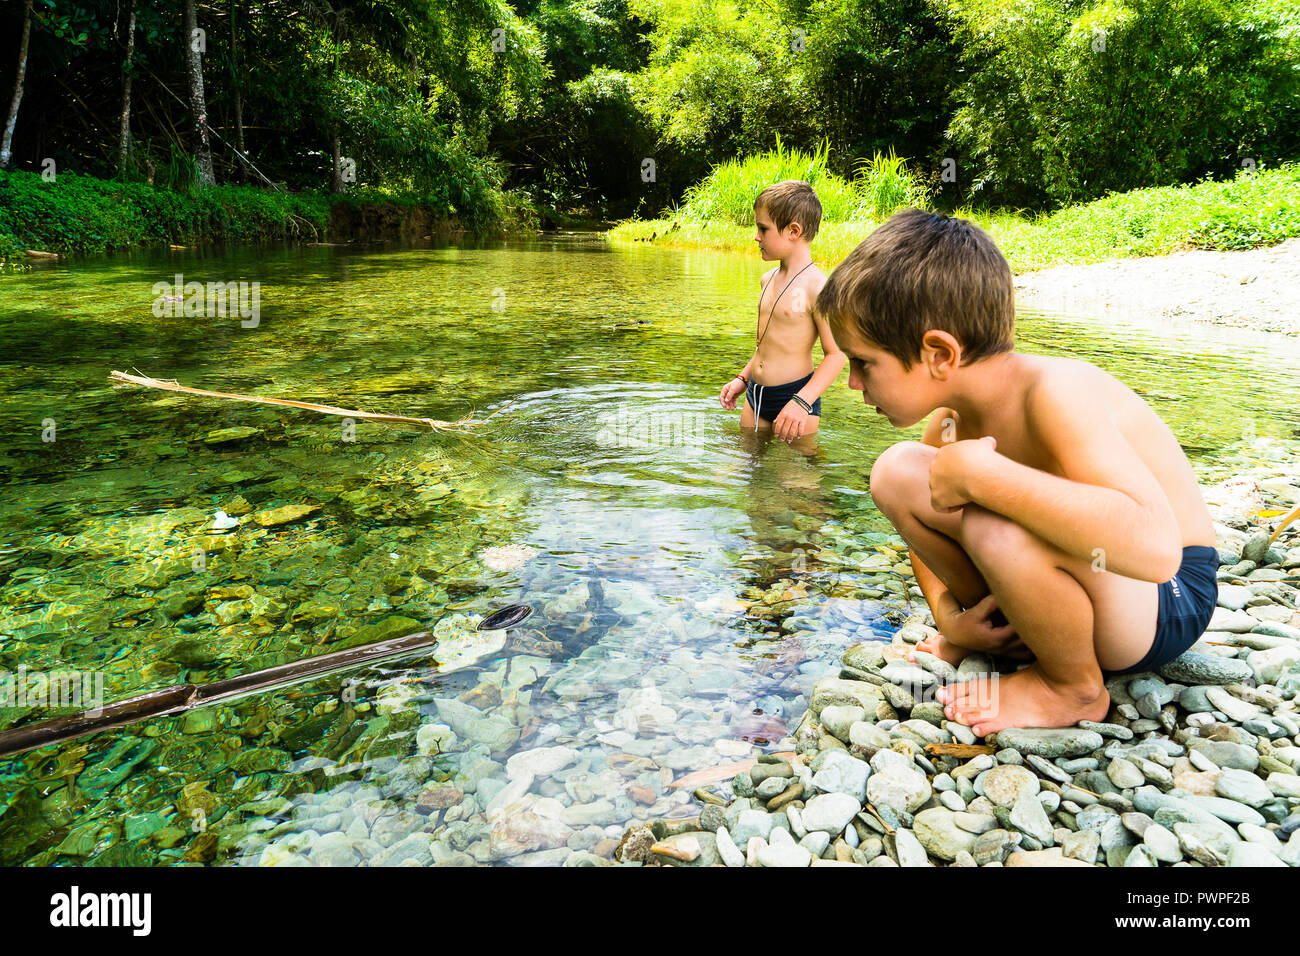 Two kids 6 and 8 years old playing in the river, Charlotteville, Tobago, Trinidad and Tobago, West Indies, South America Stock Photo